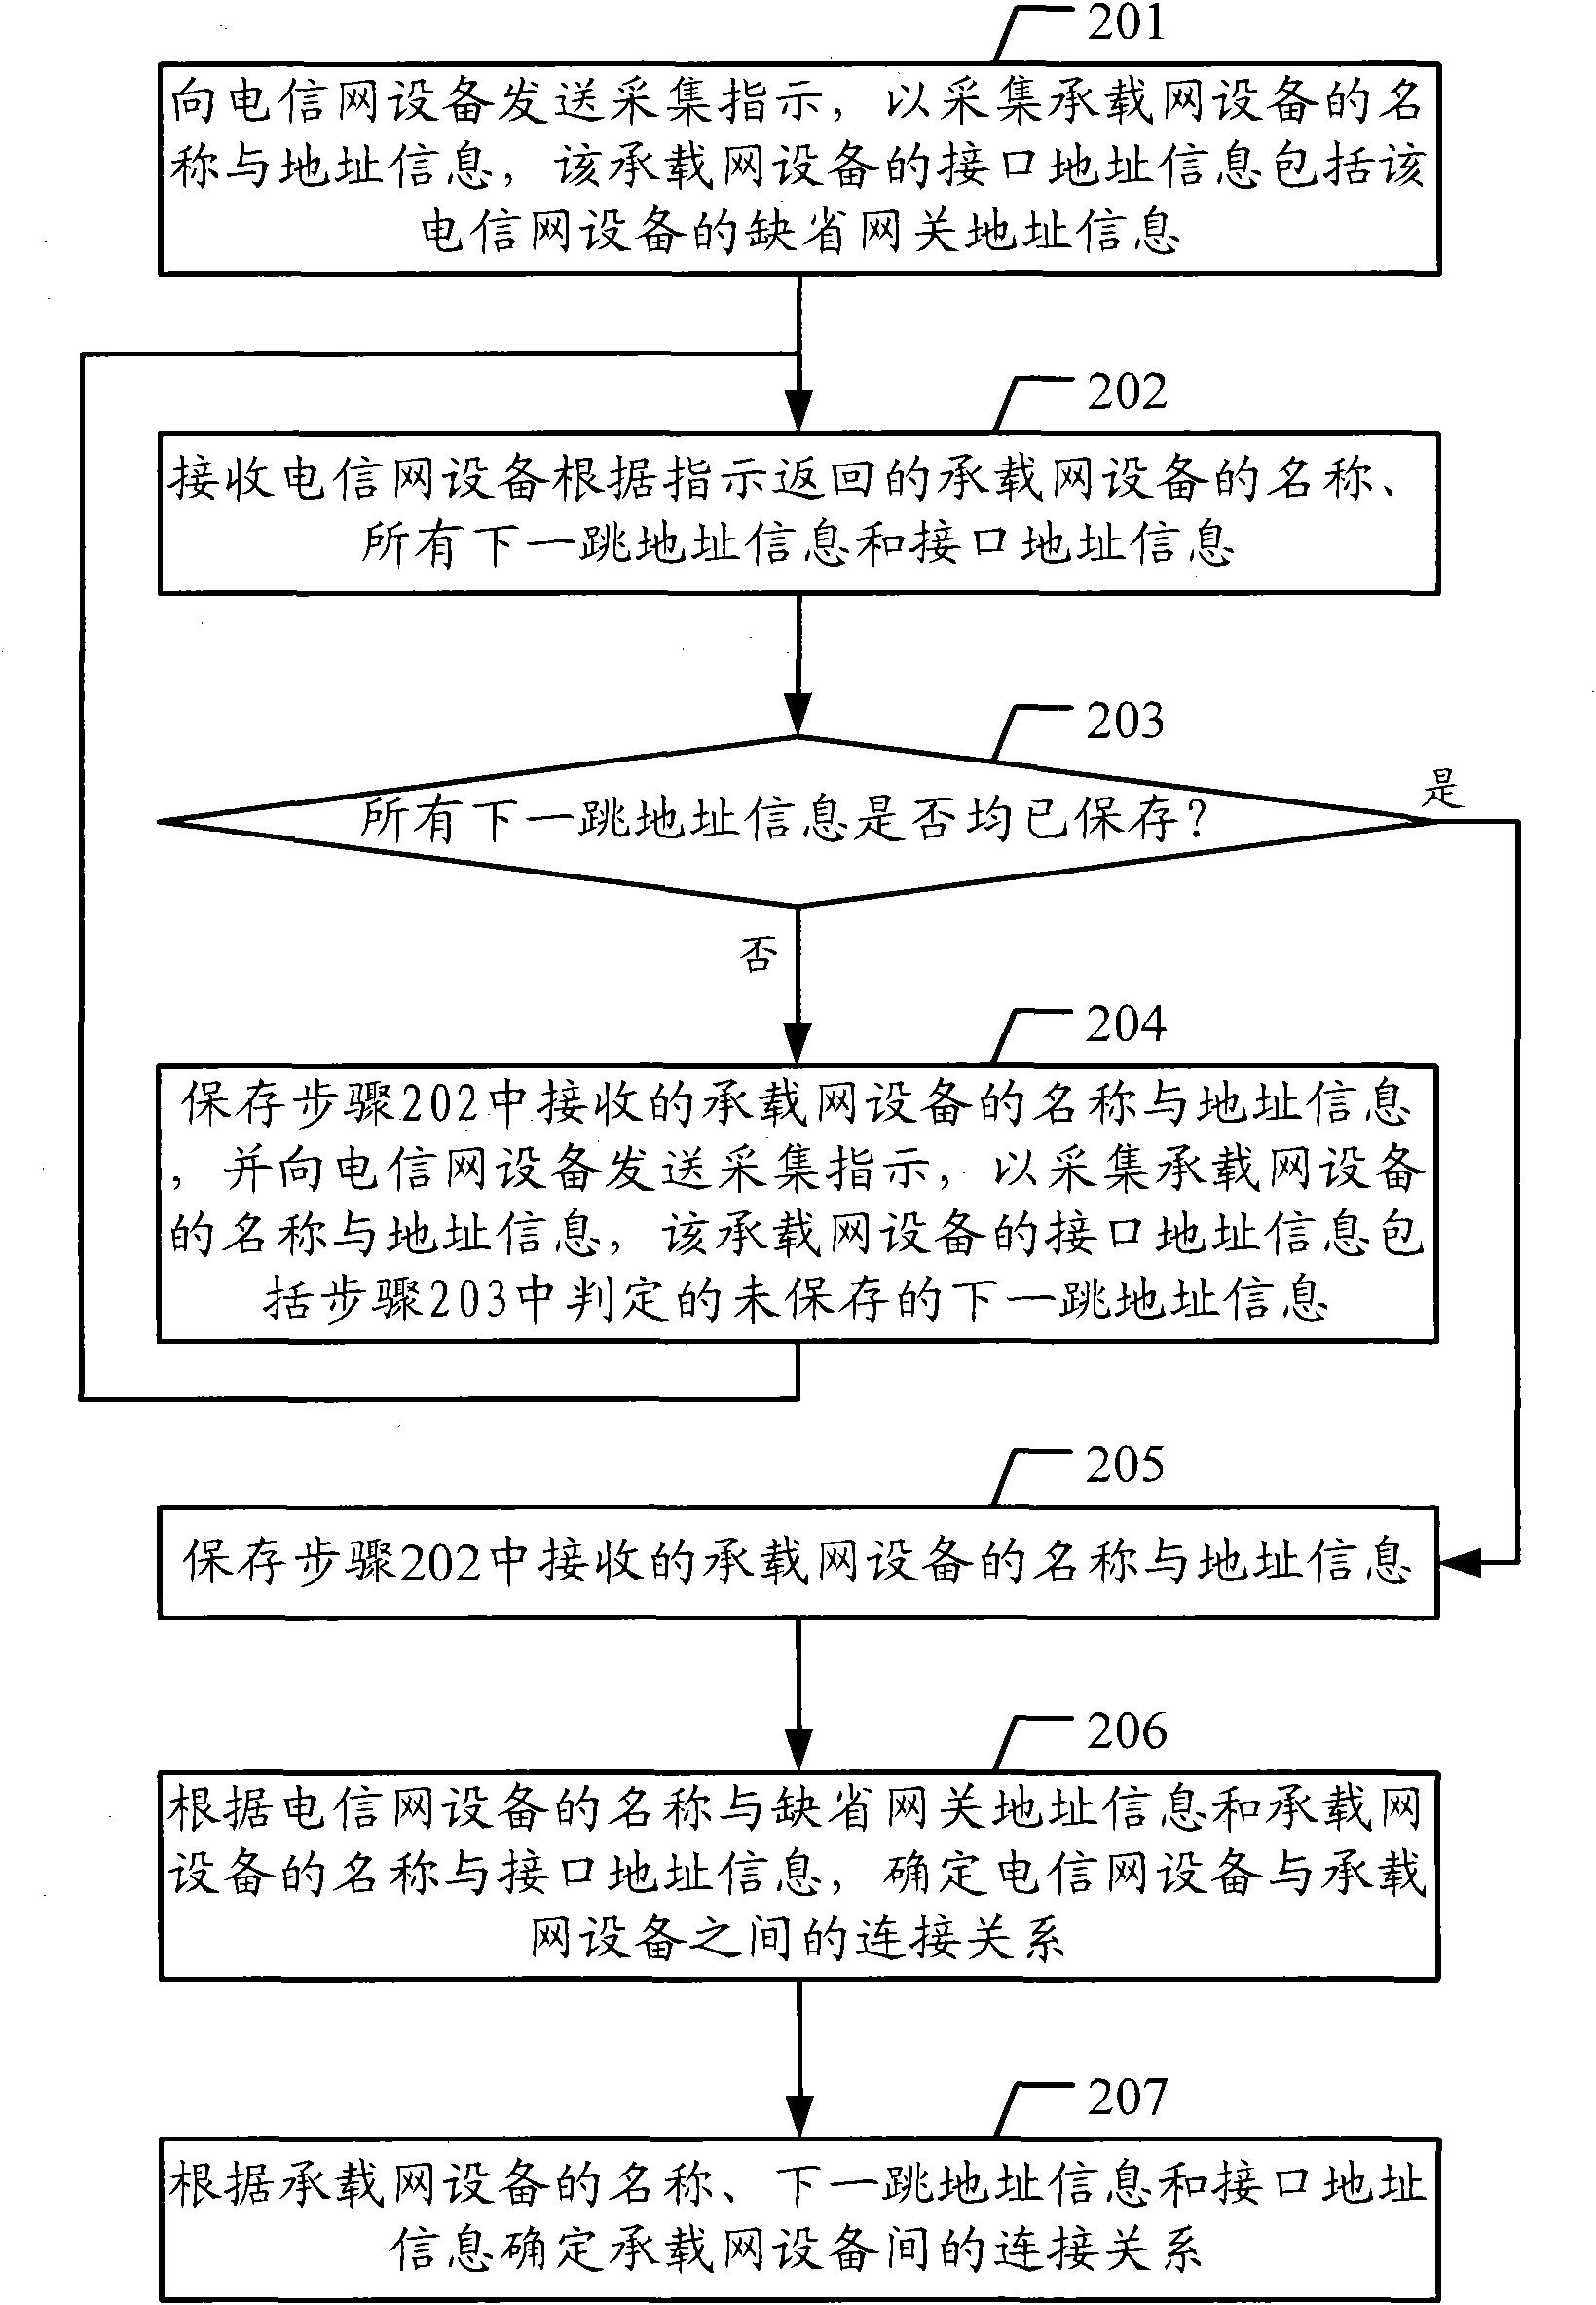 Method and device for acquiring connection relationship between network equipment